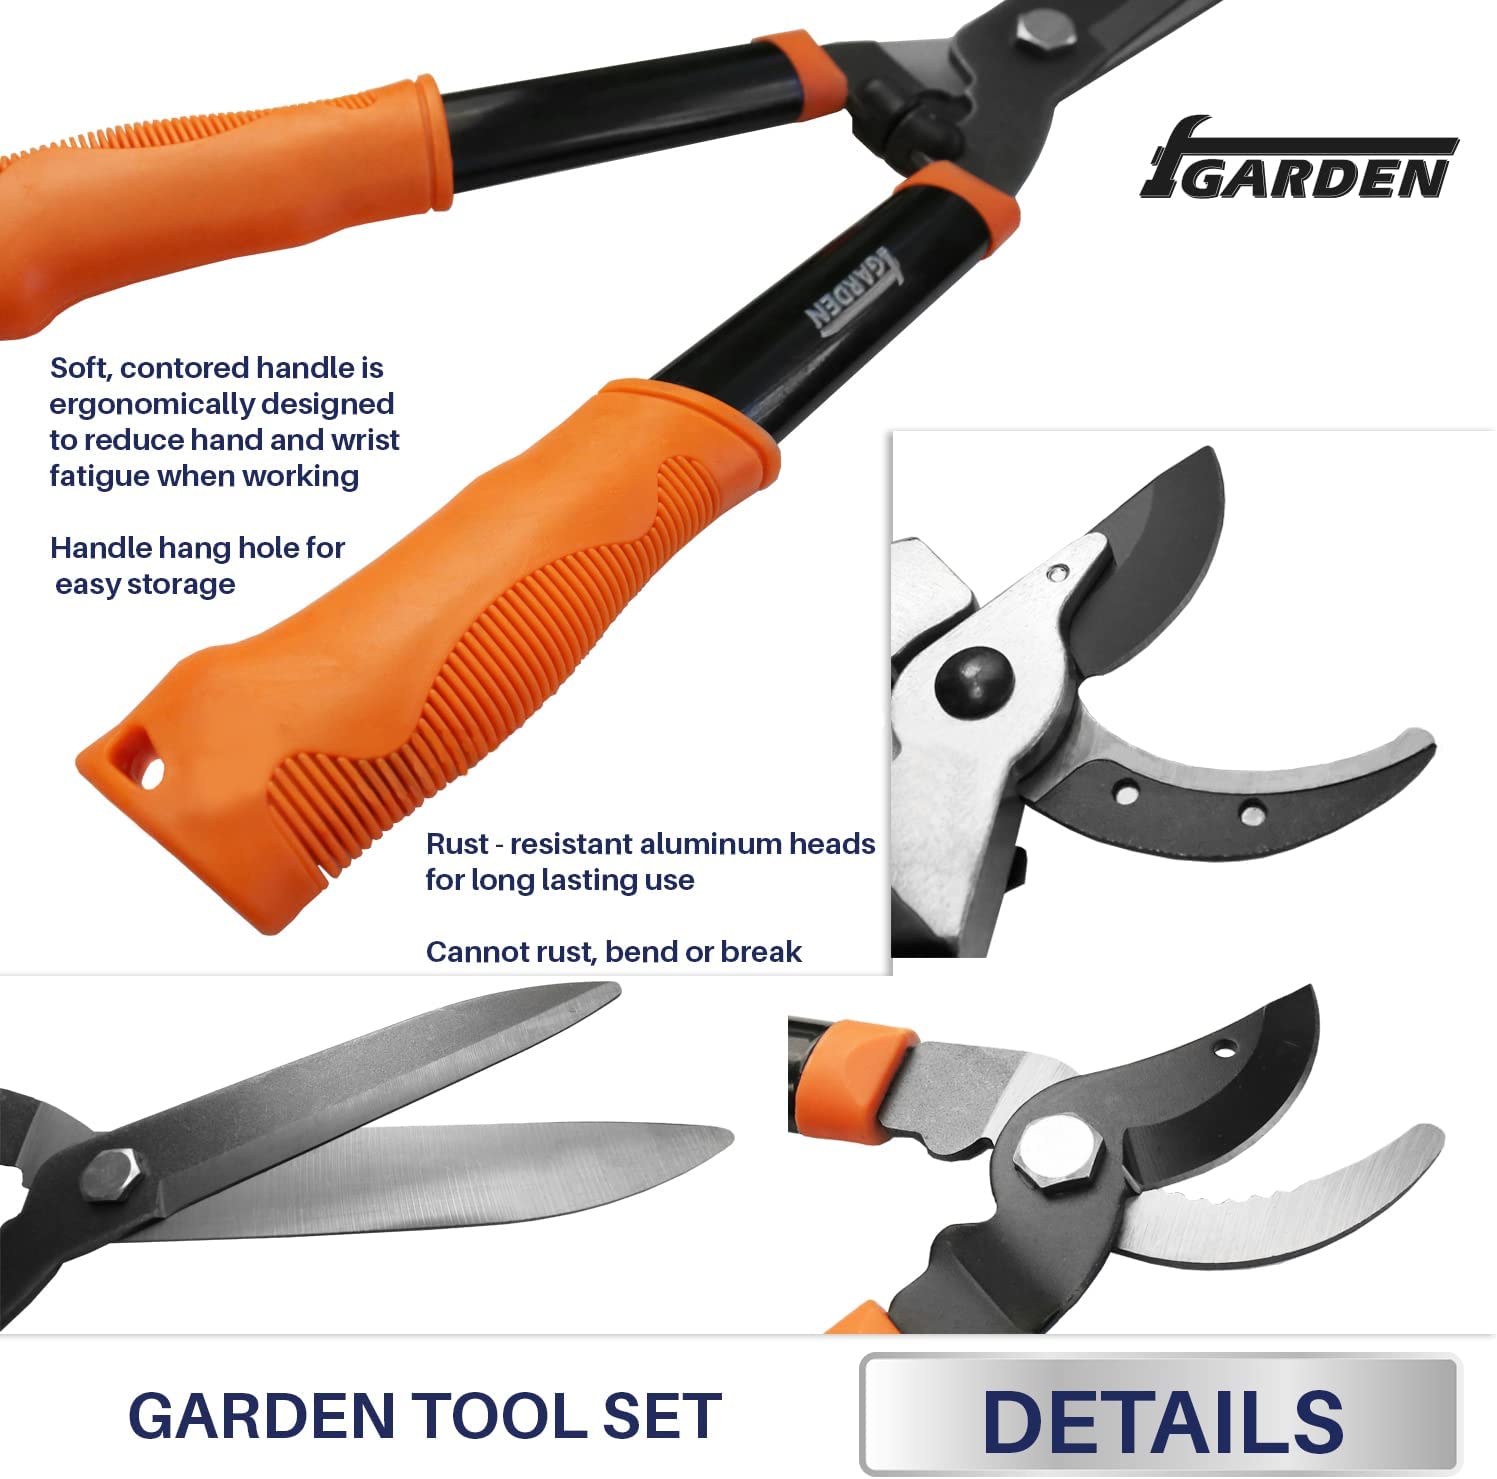 iGarden 3 Piece Combo Garden Tool Set with Lopper， Hedge Shears and Pruner Shears， Tree and Shrub Care Kit